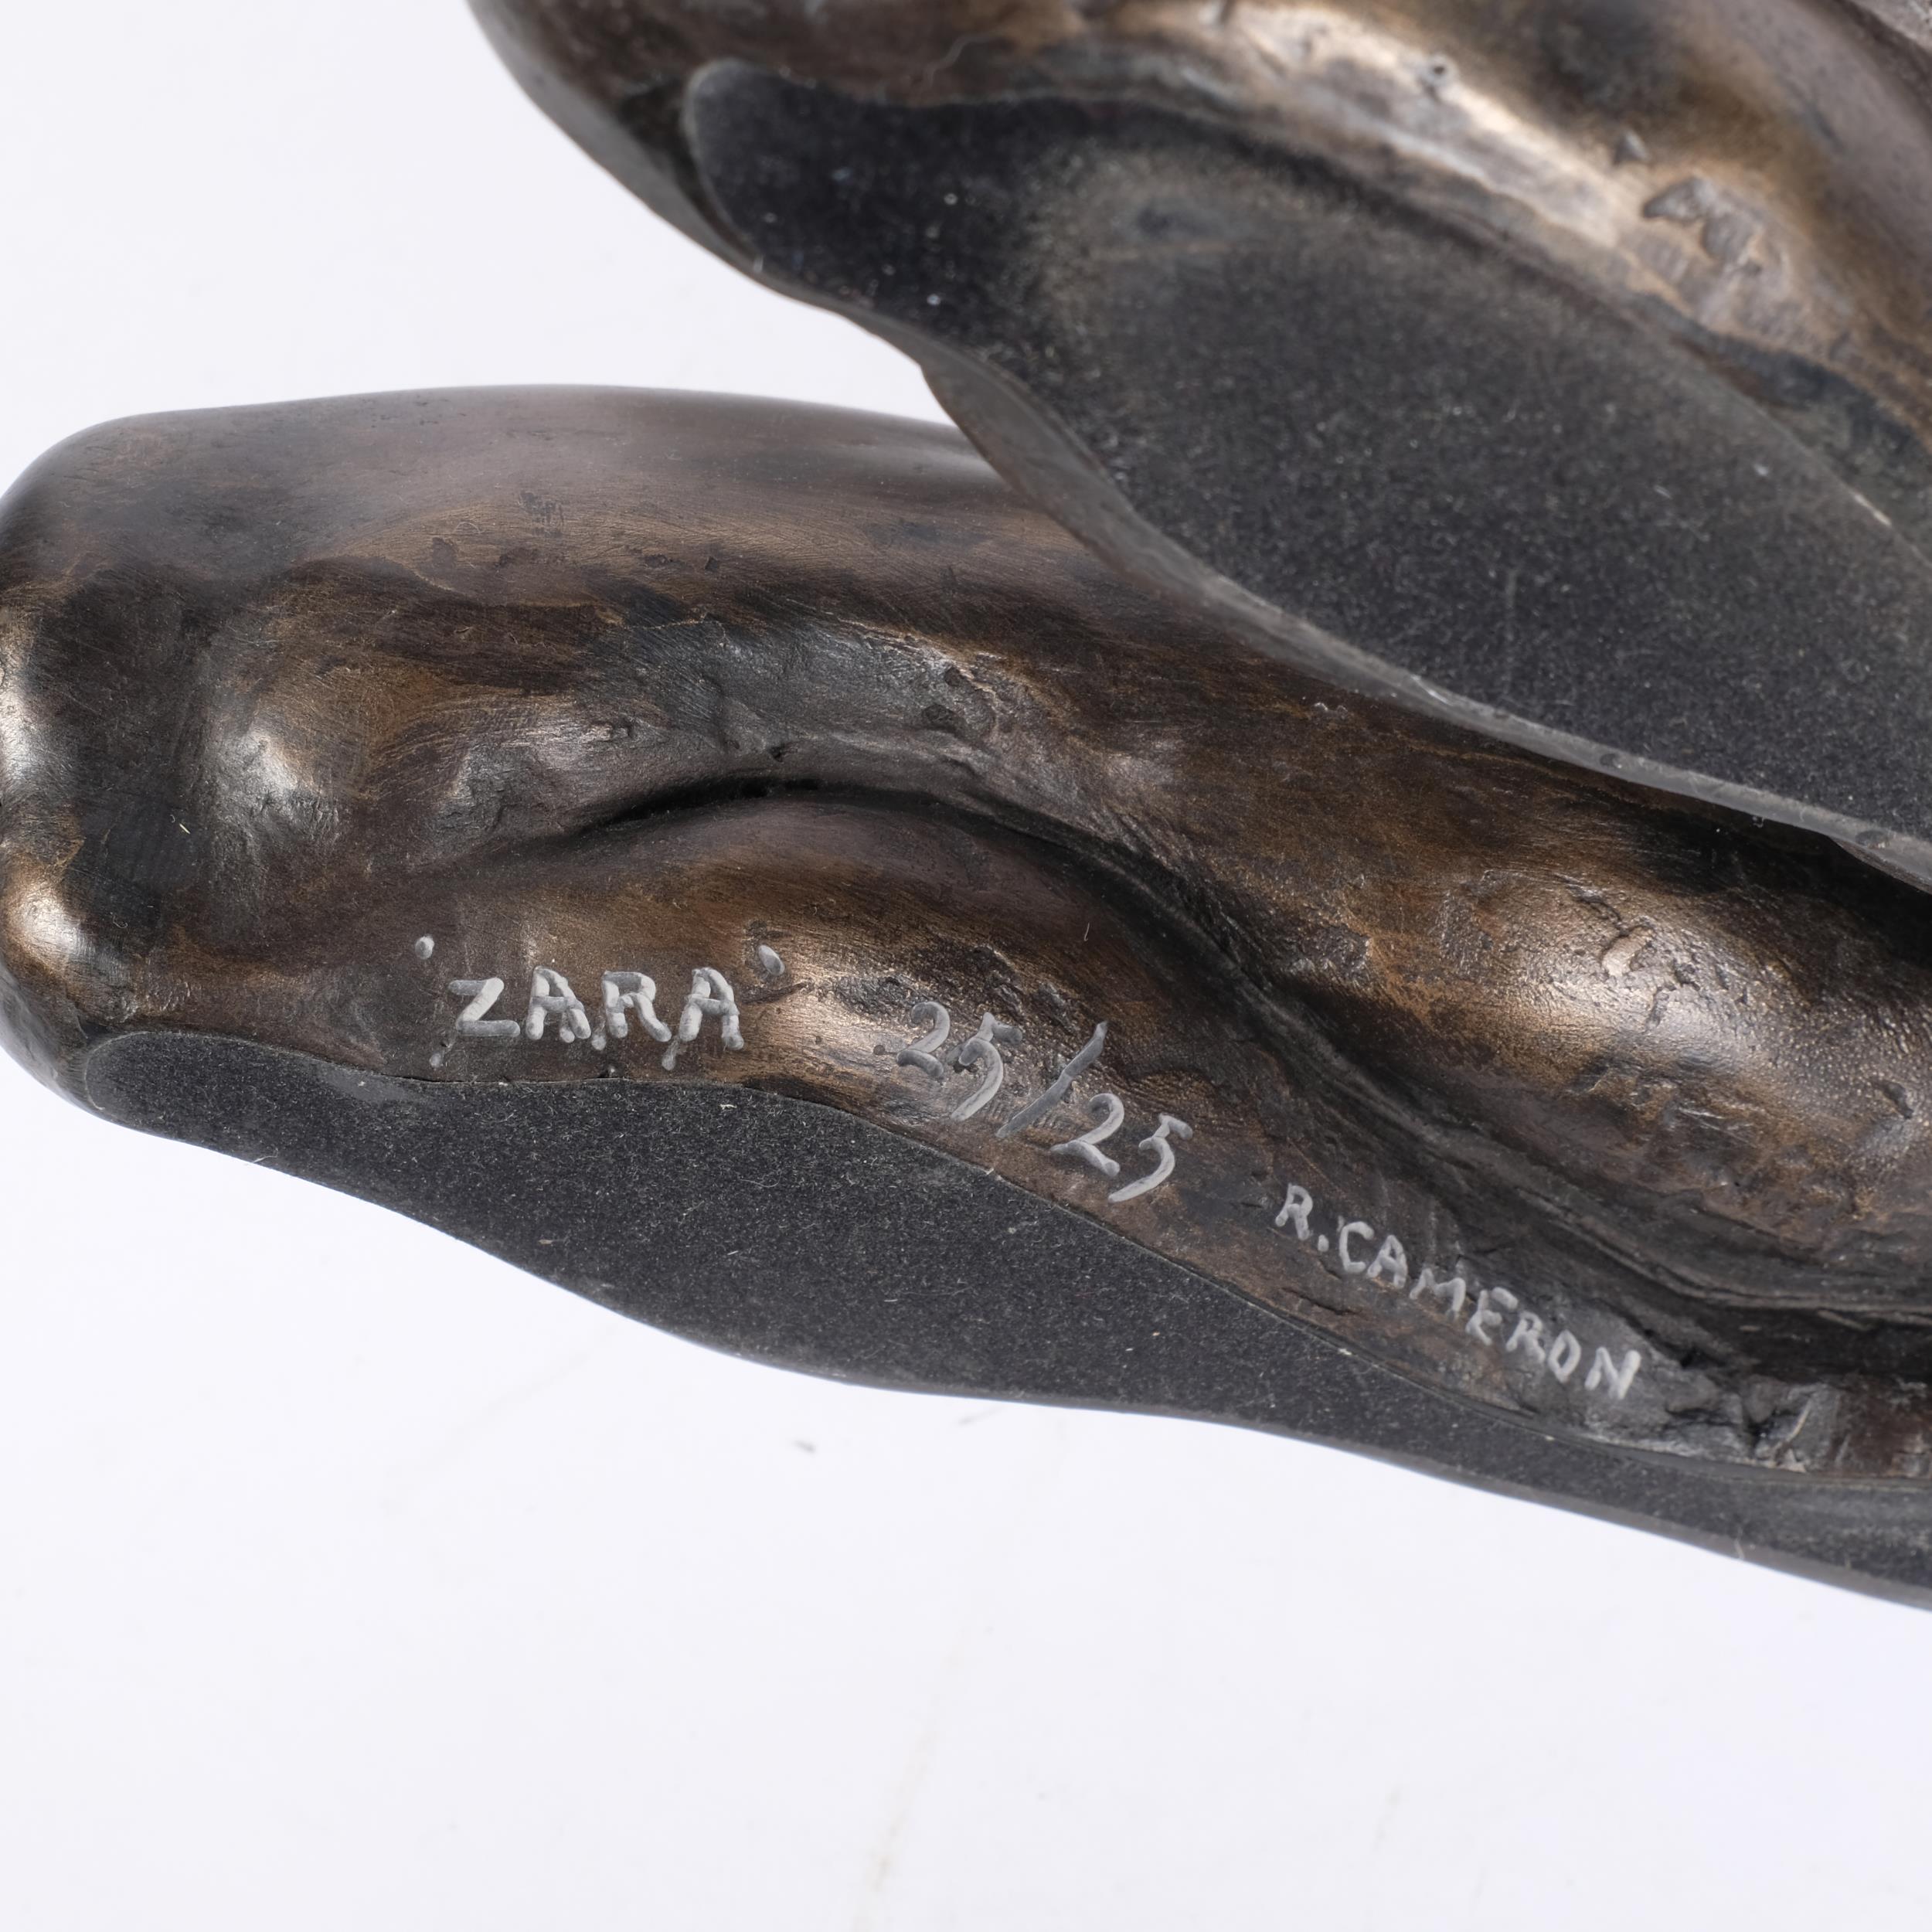 Ron Cameron, limited edition bronze resin sculpture, "Zara", 25/25, 41cm - Image 2 of 2